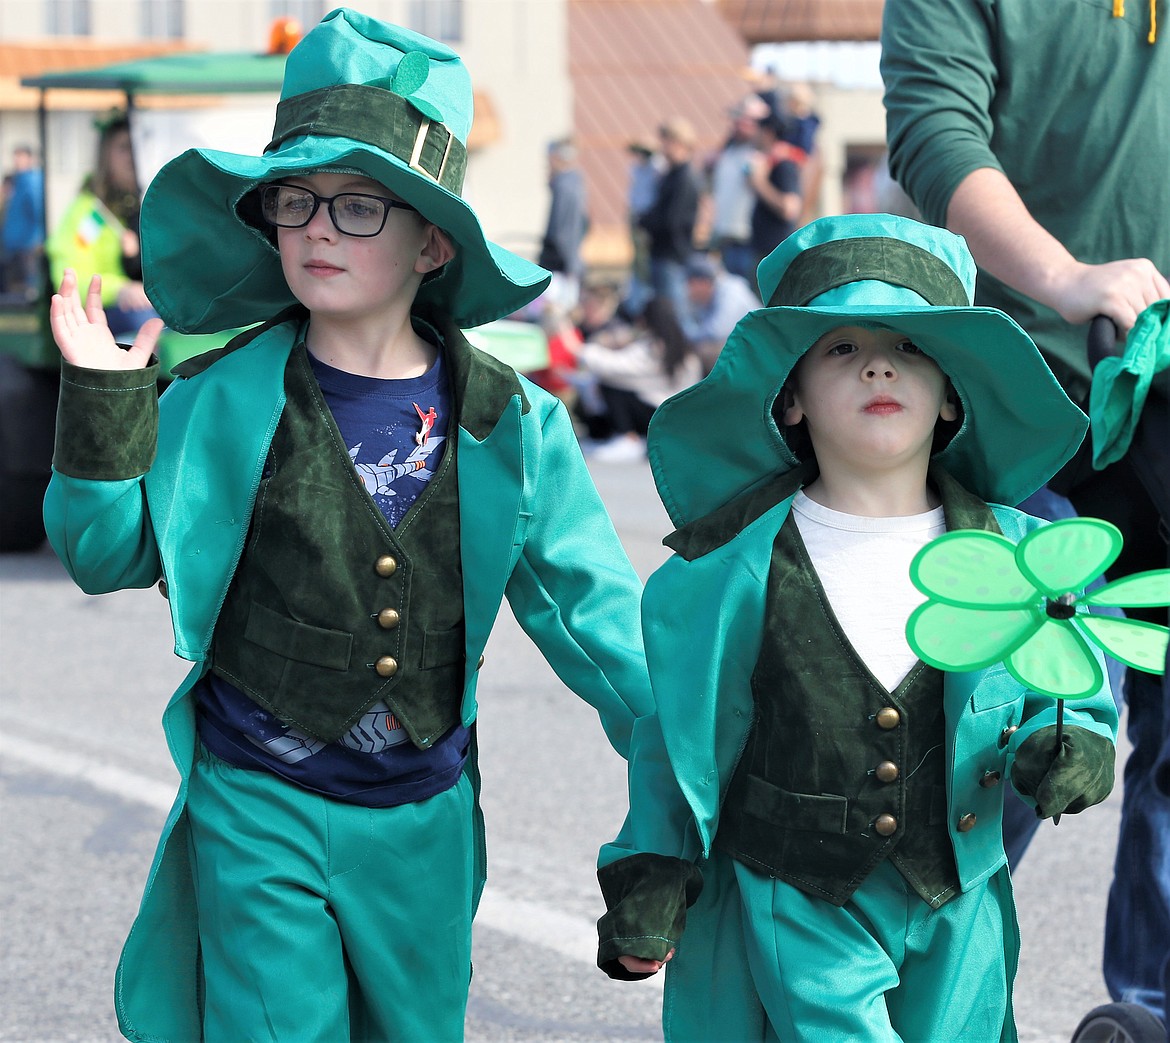 Henry and Finn Terra participate in the St. Patrick's Day Parade.